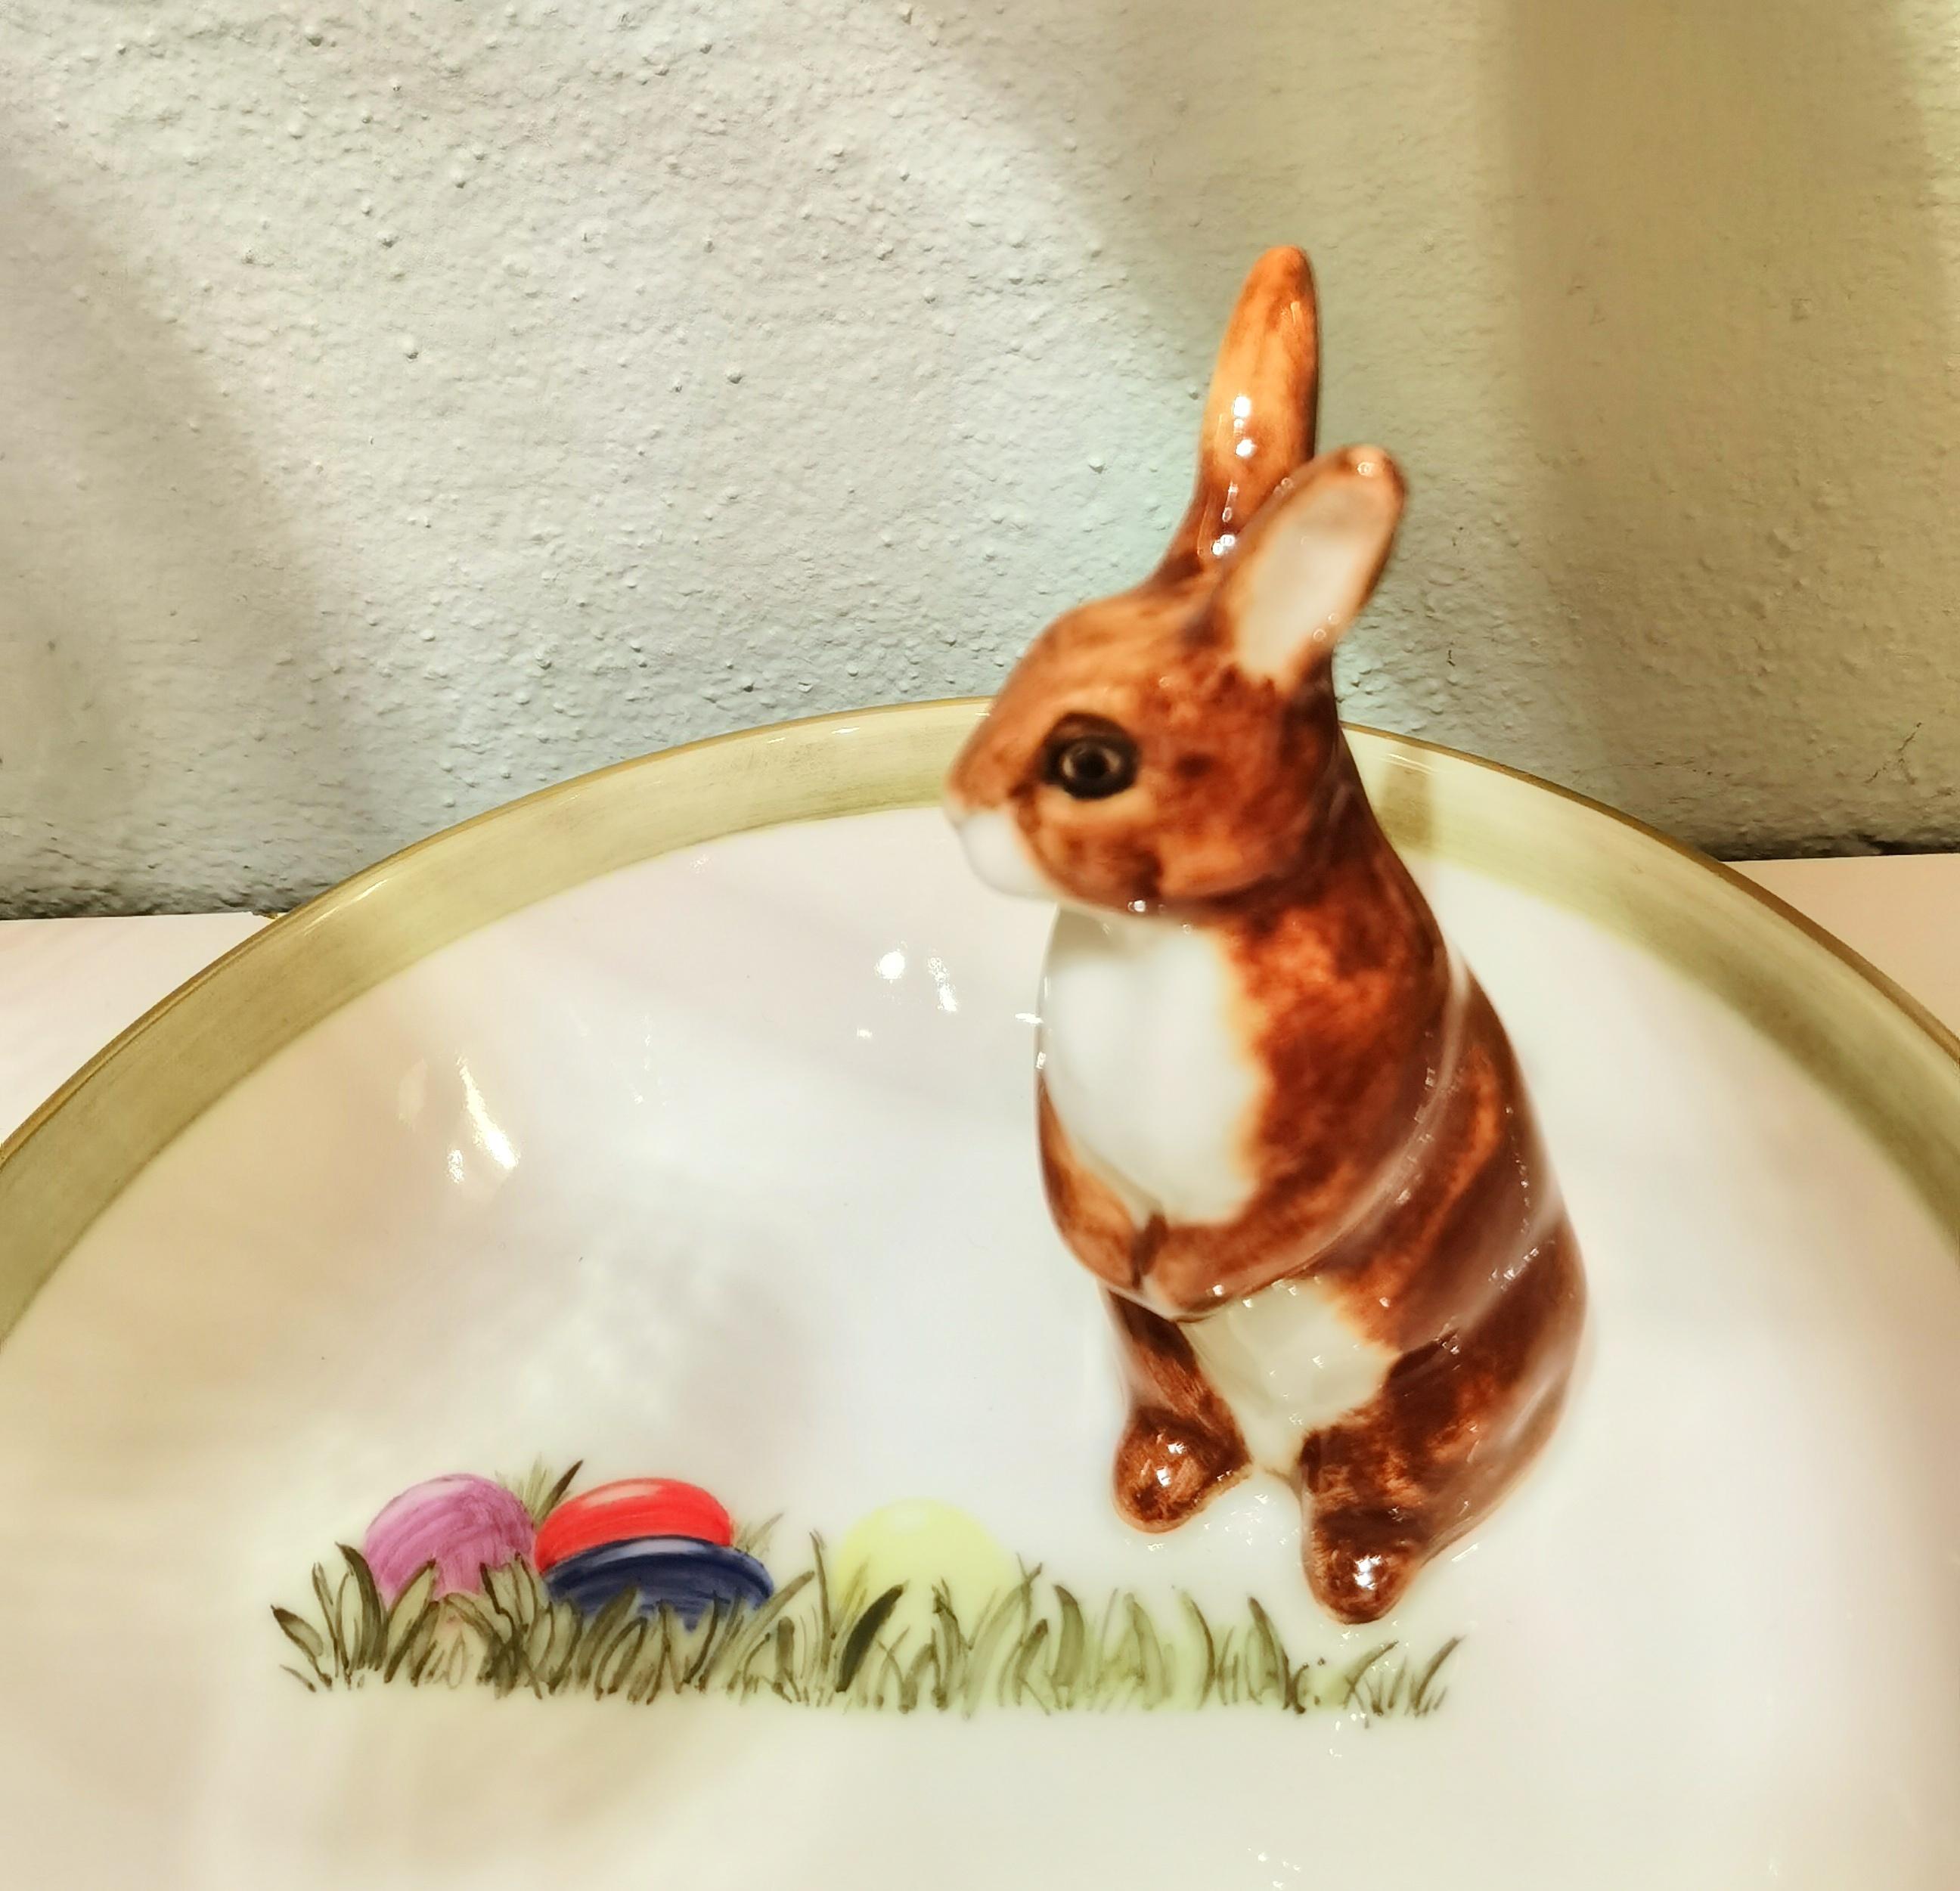 Completely handmade porcelain bowl with a hands-free naturalistic painted bunny figure in brown color in country style. The bunny is sitting at the side of the bowl for decorating nuts or sweets around. Hands-free painted with colred eggs at the